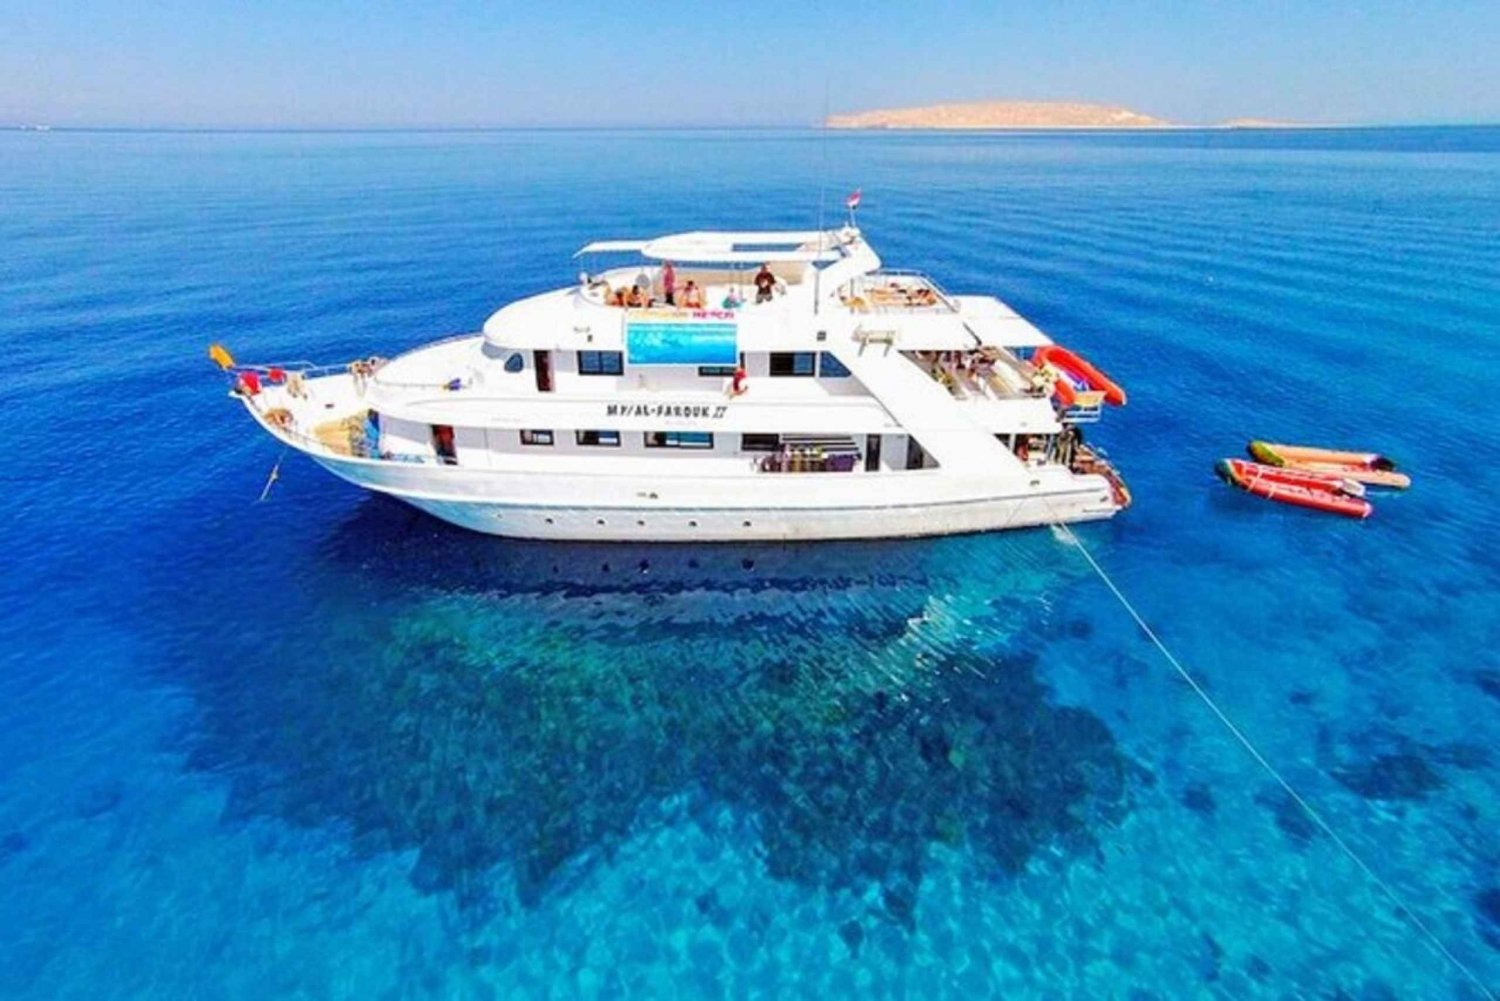 Sharm El Sheikh: Ras Mohammed Luxury Cruise with BBQ Lunch